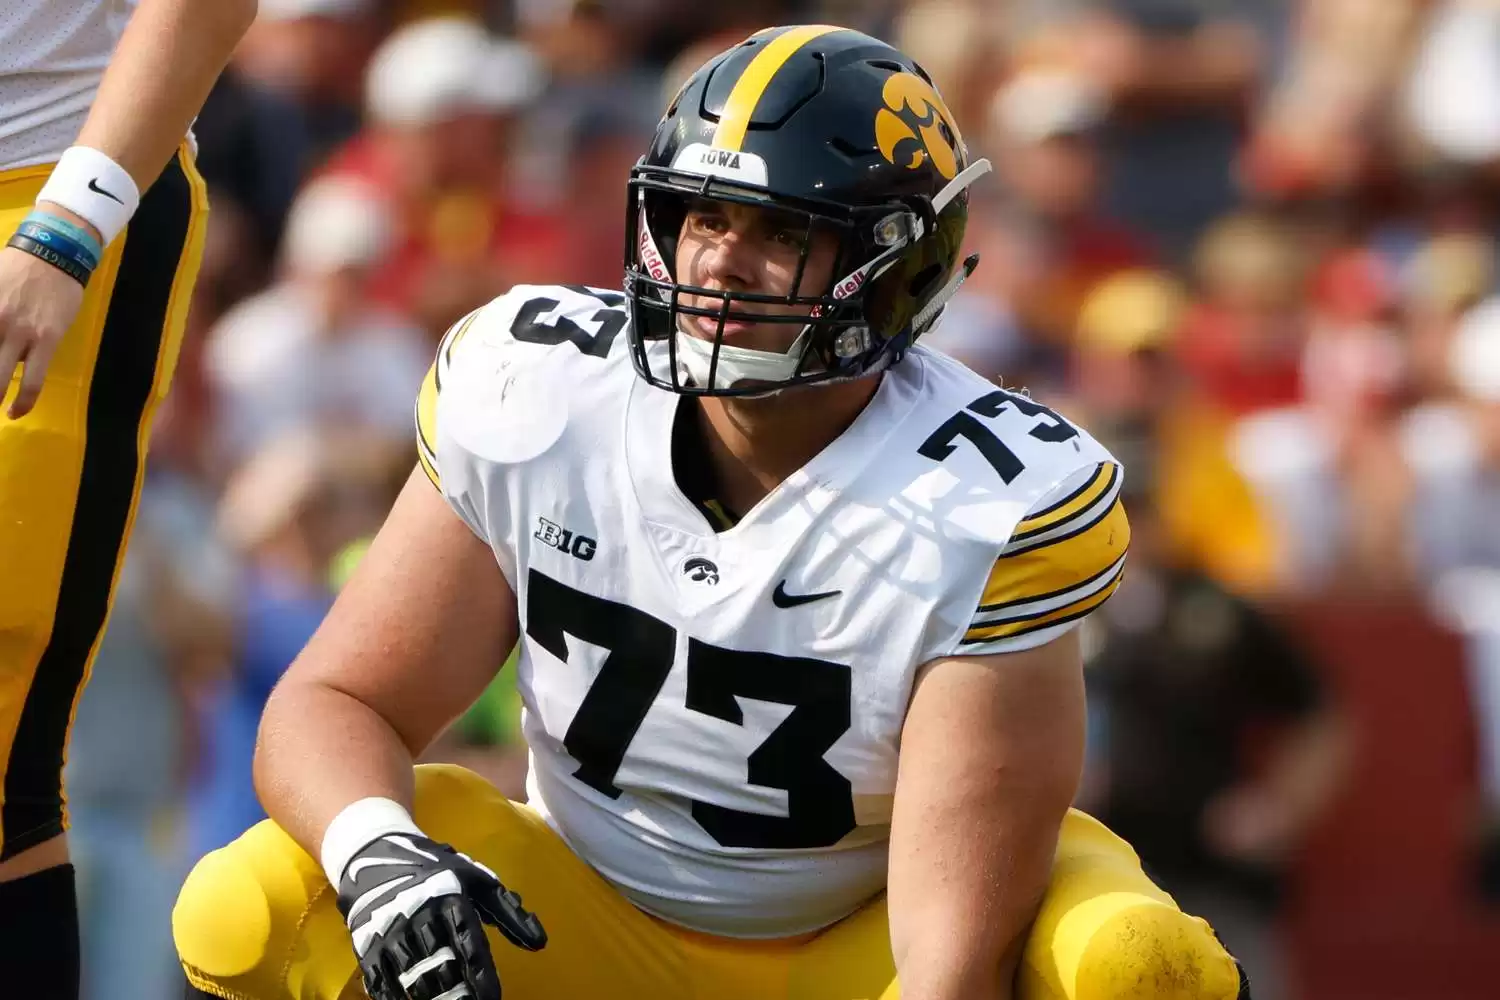 Former Iowa Hawkeyes Offensive Lineman, Cody Ince, Passes Away at Age 23, Days Before Wedding